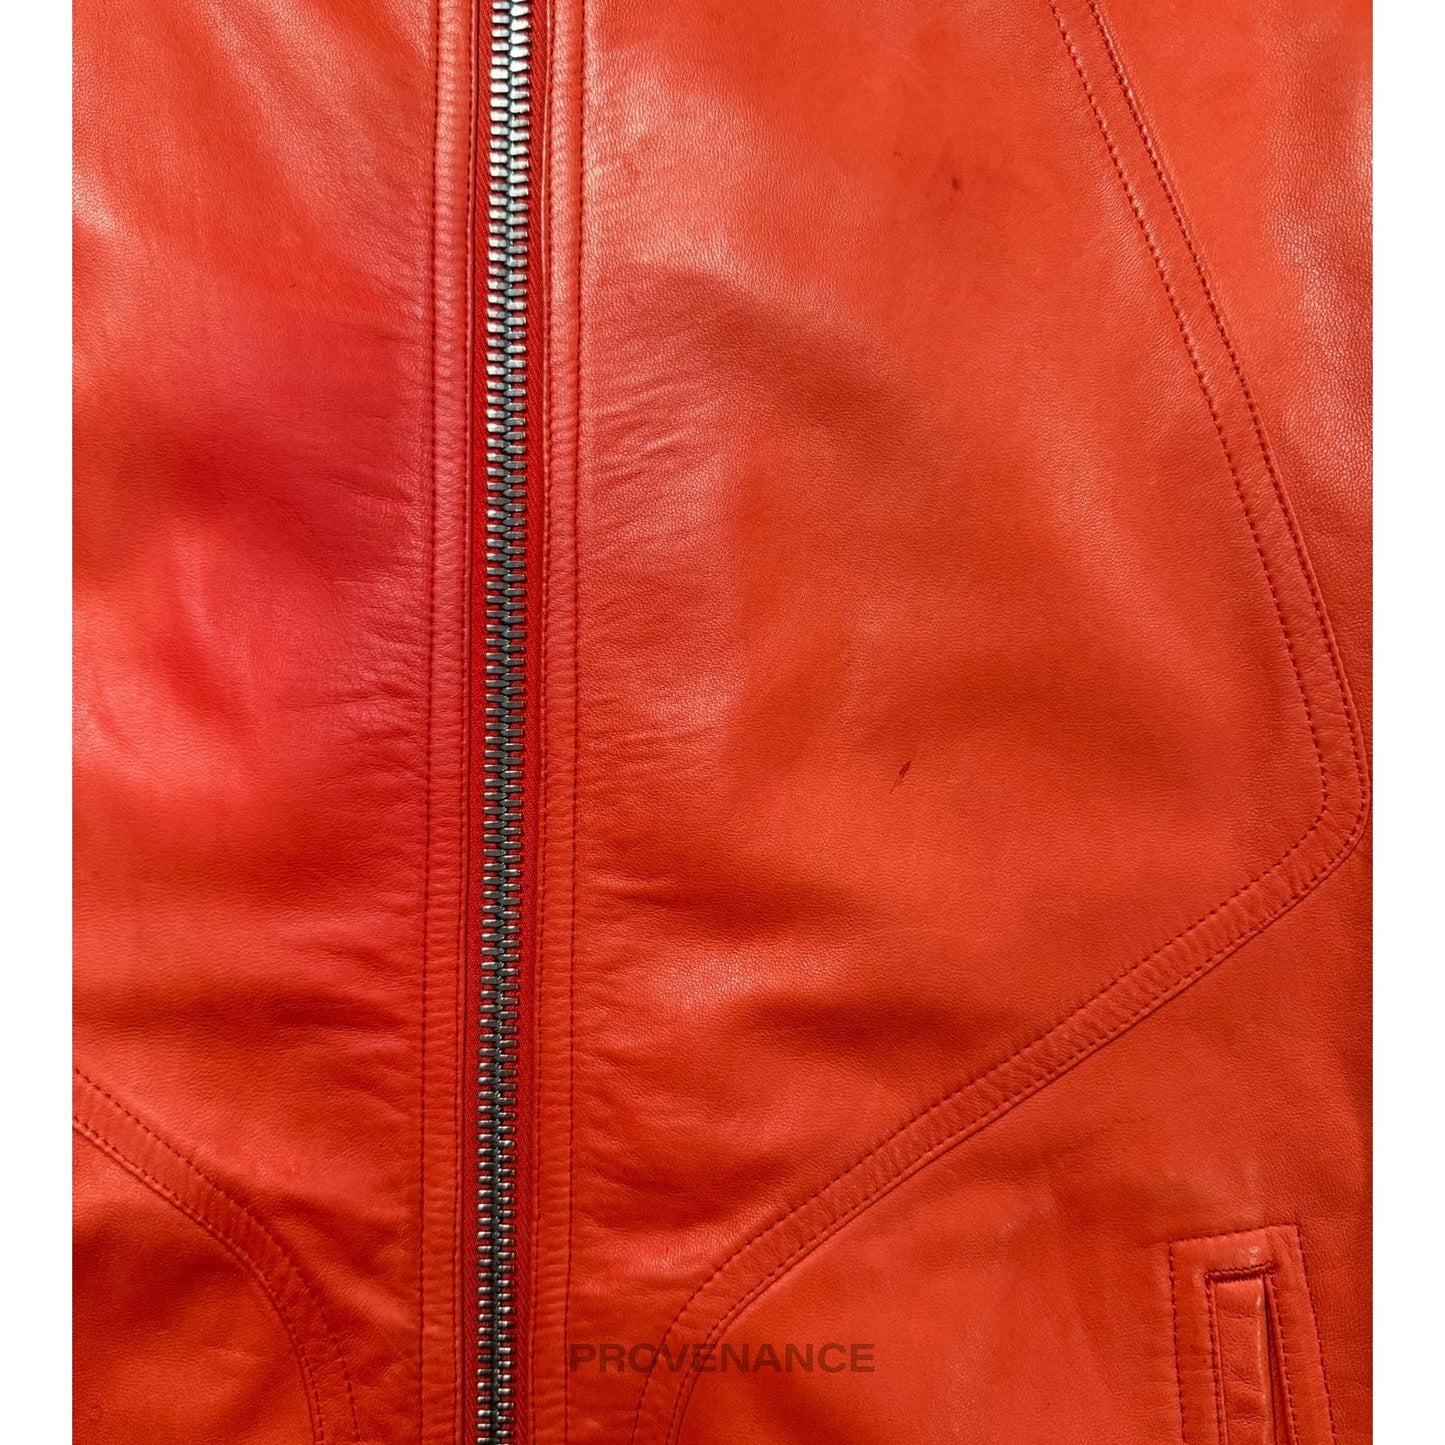 🔴 Rick Owens Walrus Intarsia Leather Jacket - 50 Red